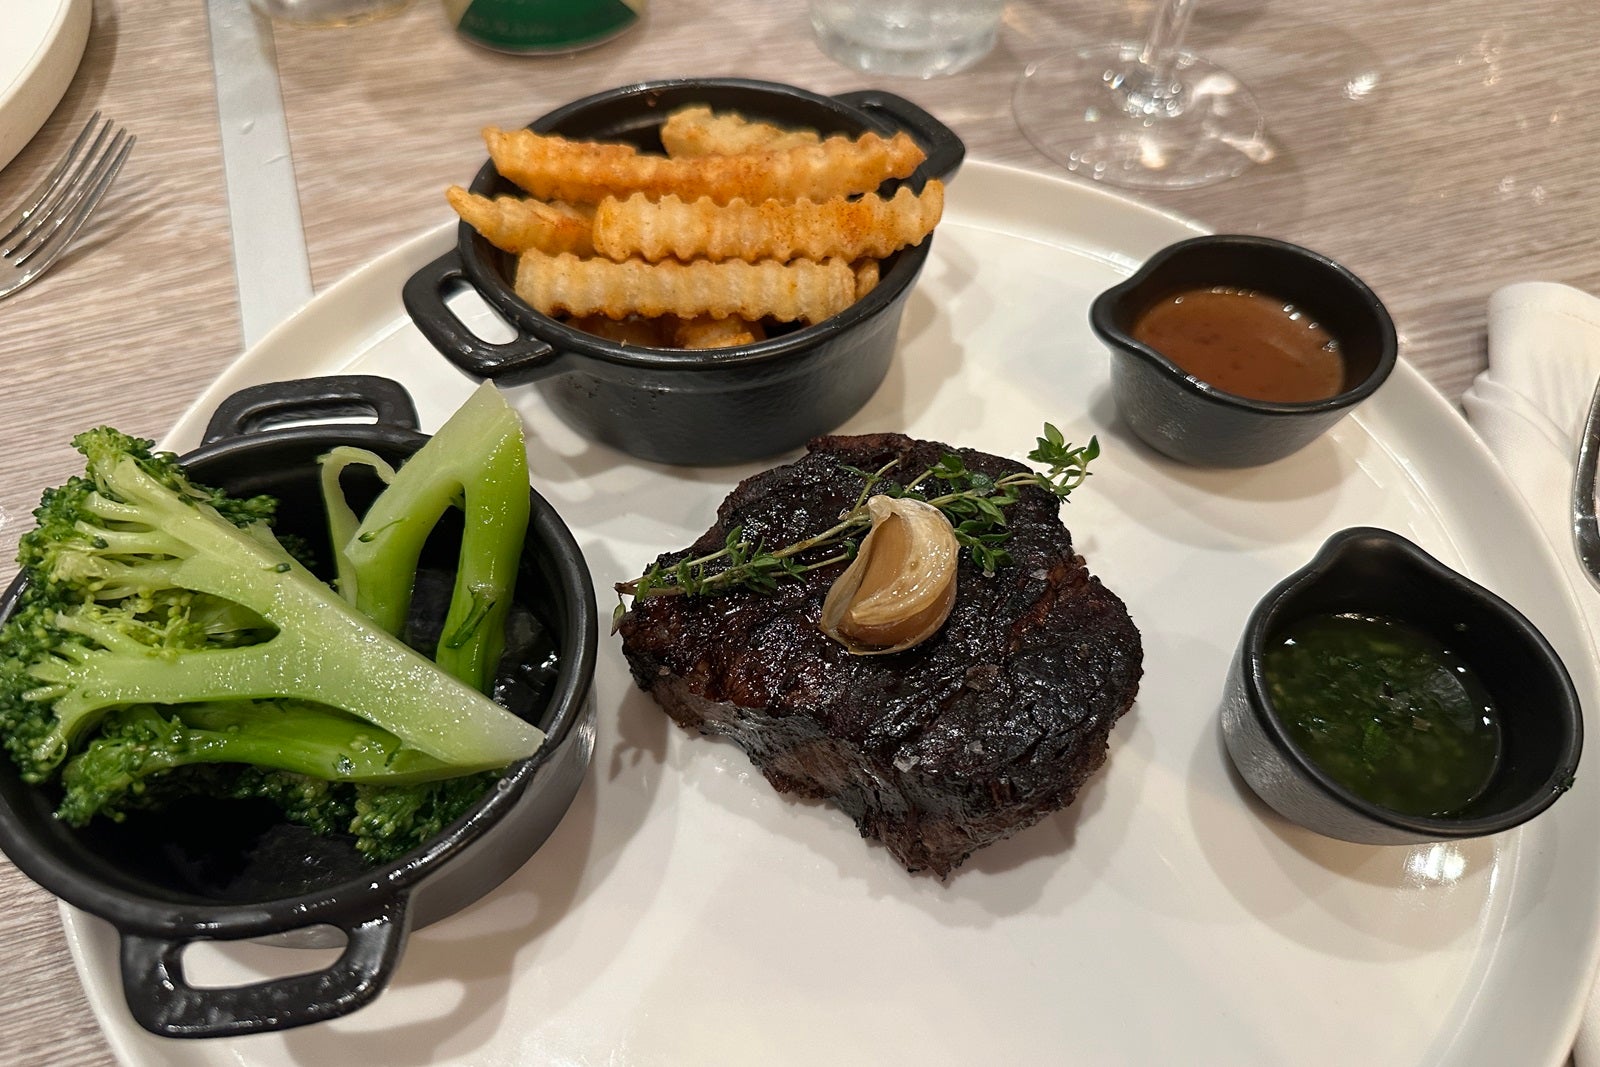 A white plate with broccoli, steak and fries